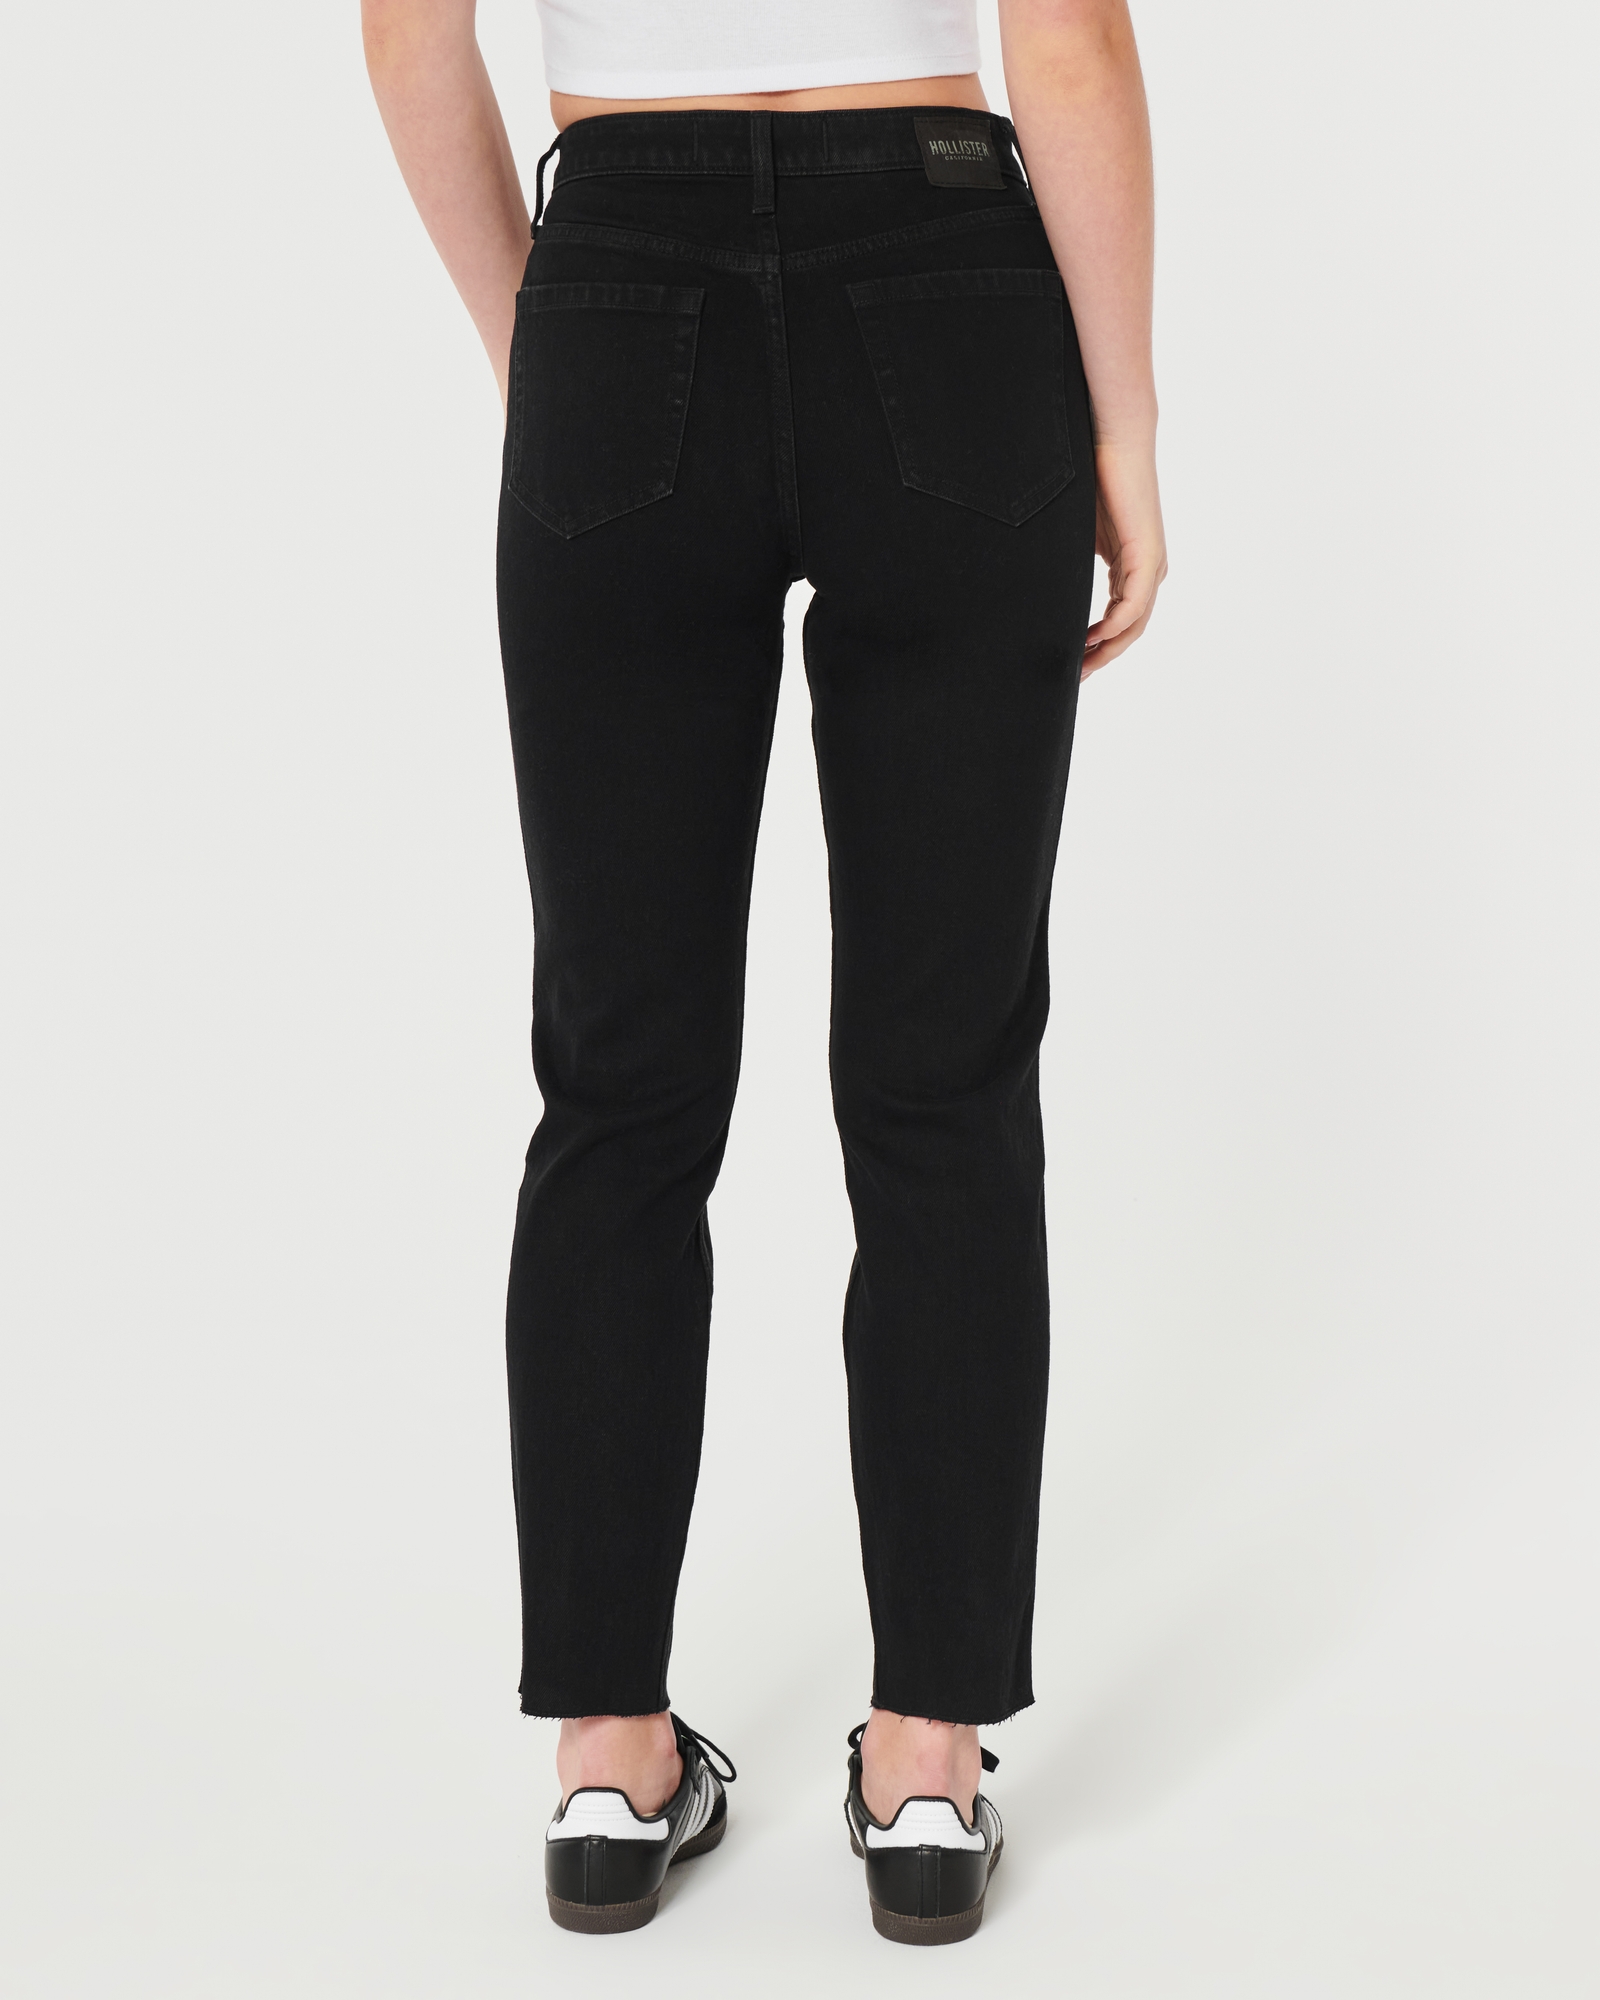 Hollister Ultra High Rise Mom Jeans Size 23 - $14 (44% Off Retail